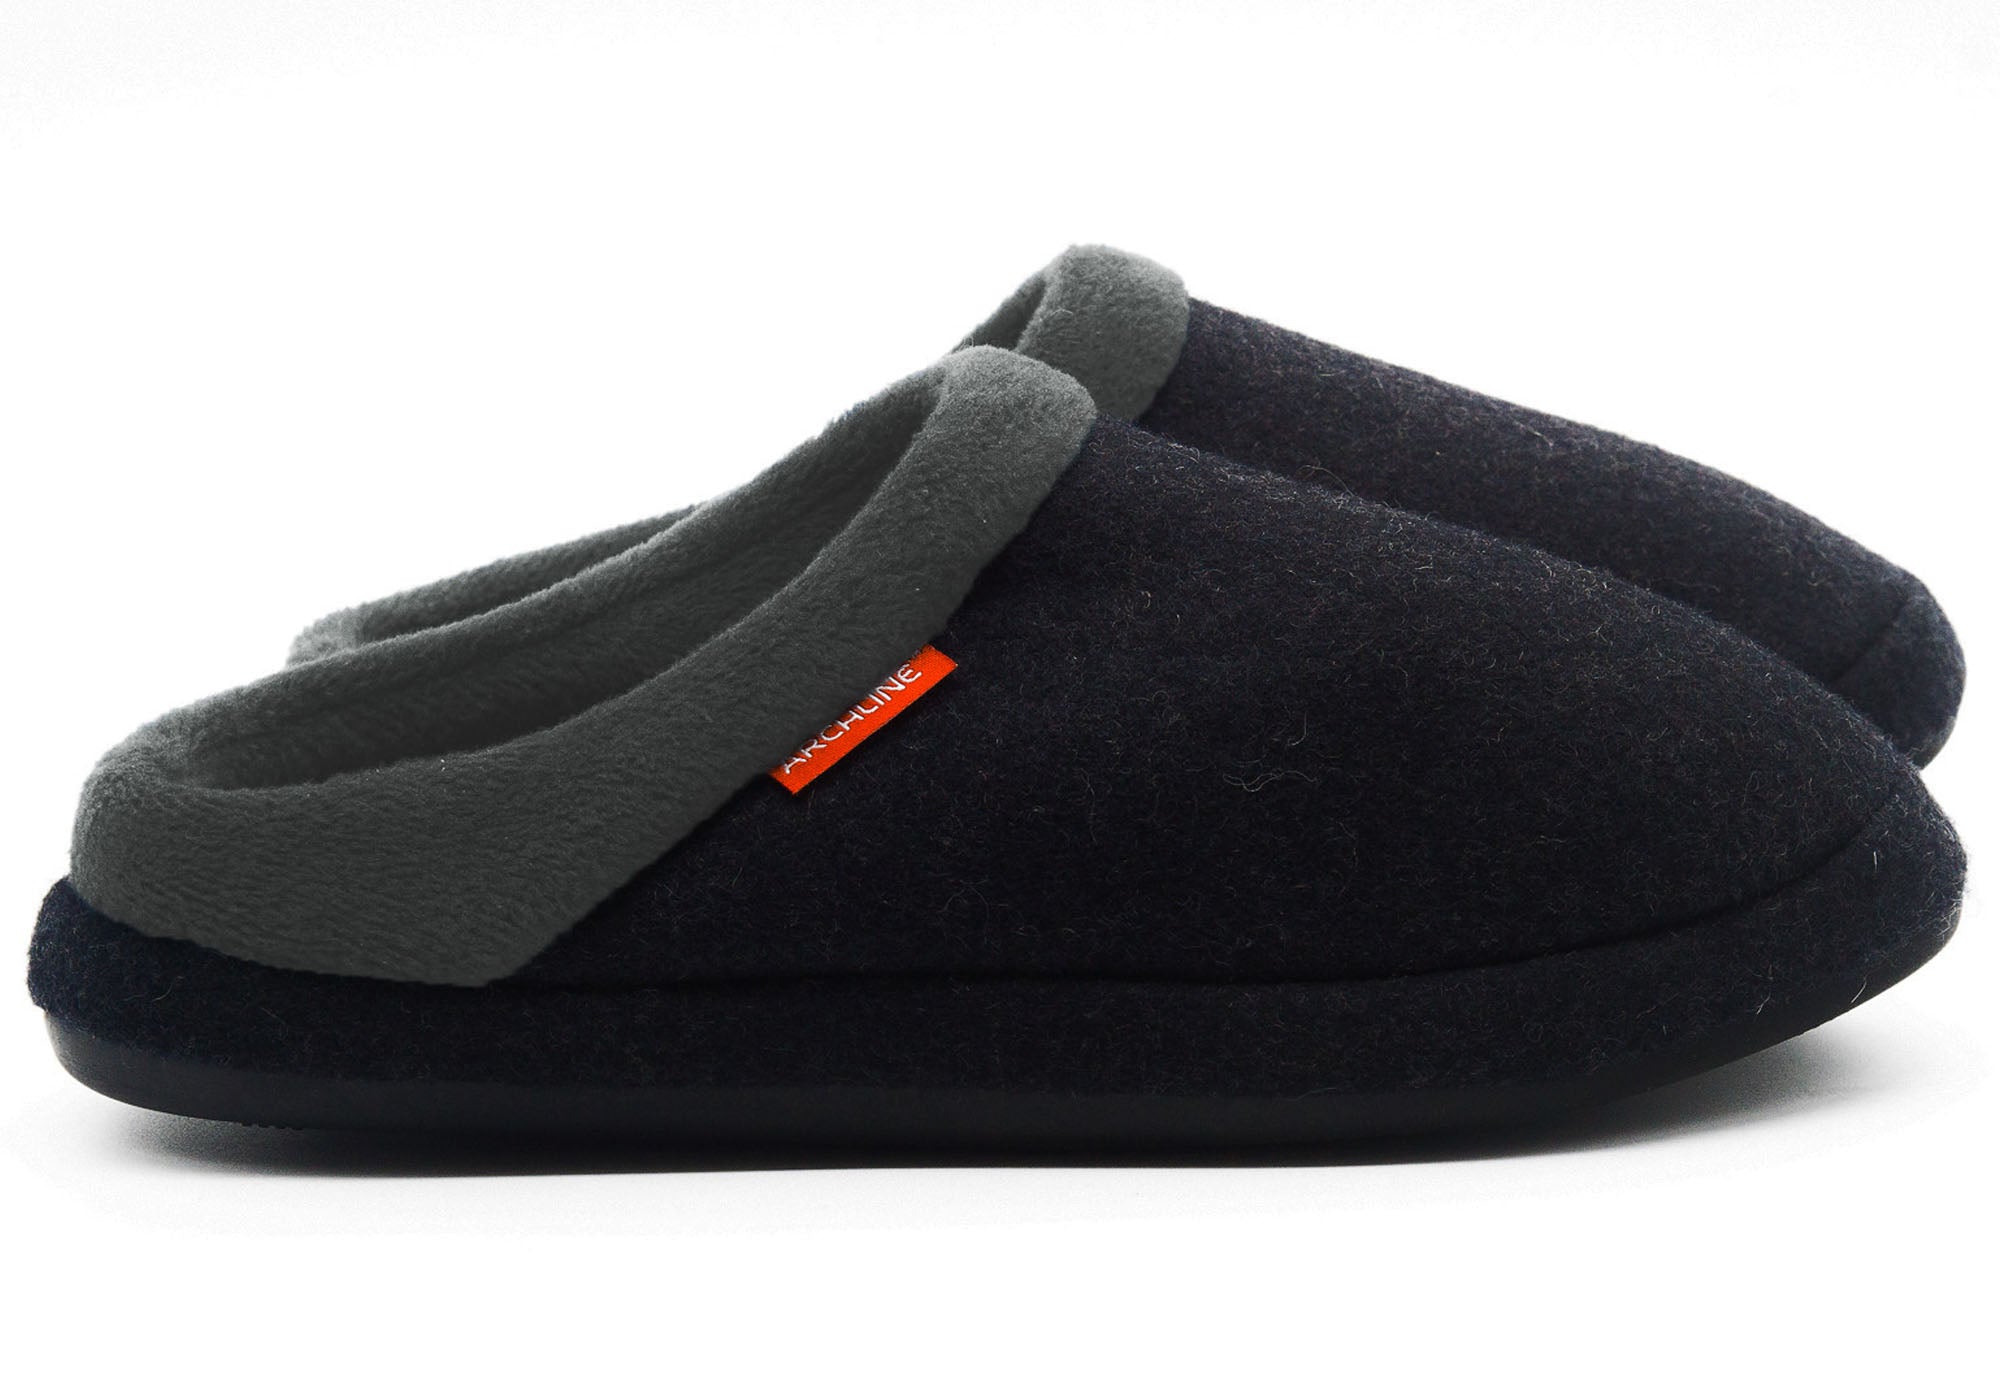 orthotic slippers